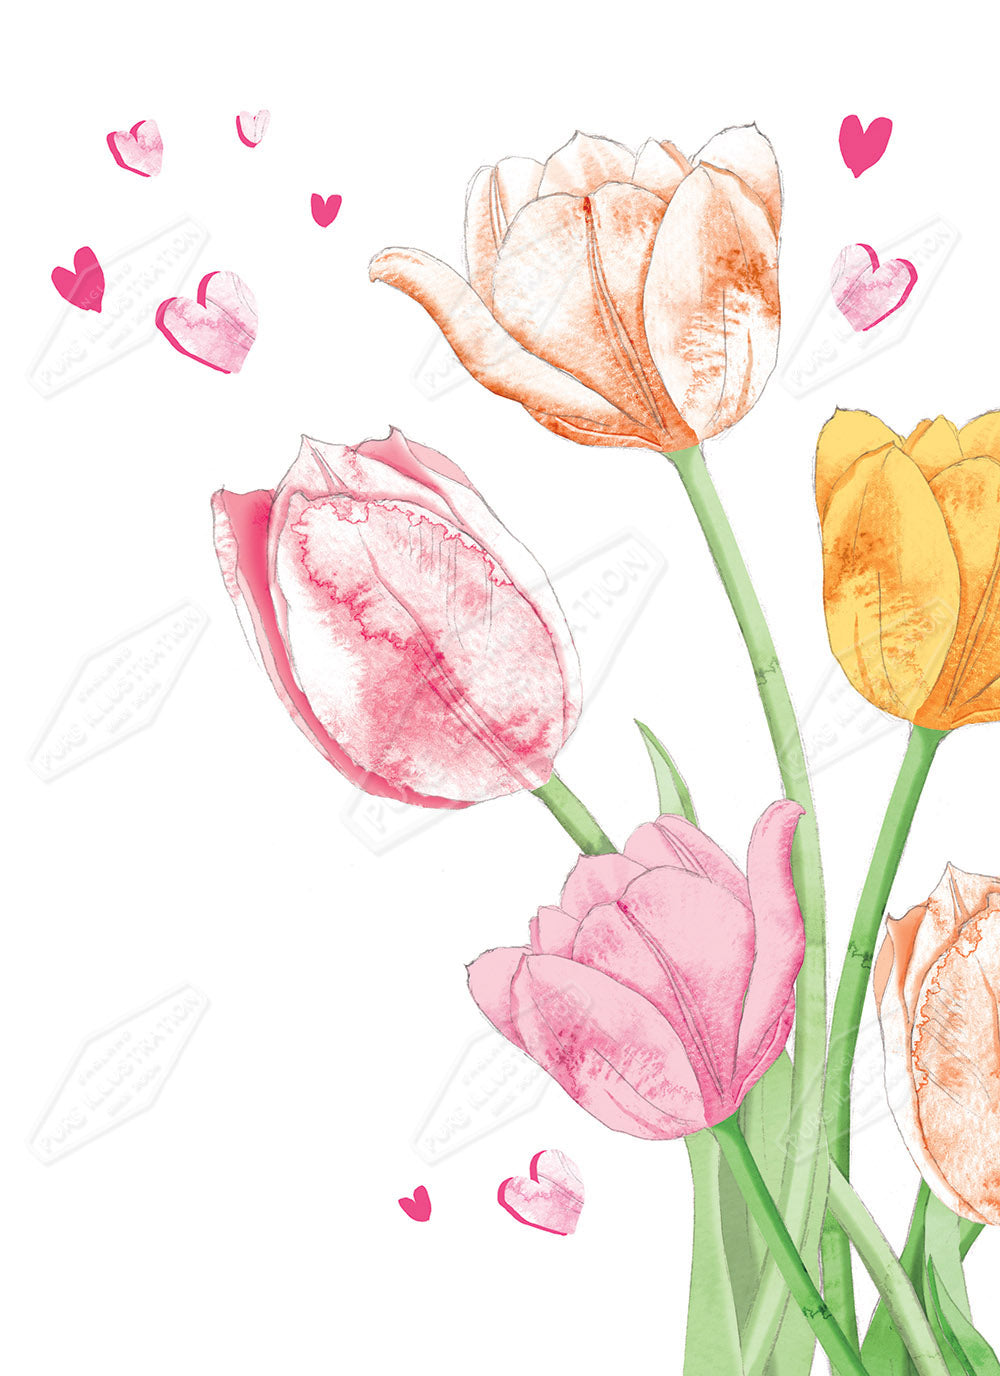 Tulips Birthday Design by Victoria Marks for Pure Art Licensing Agency & Surface Design Studio